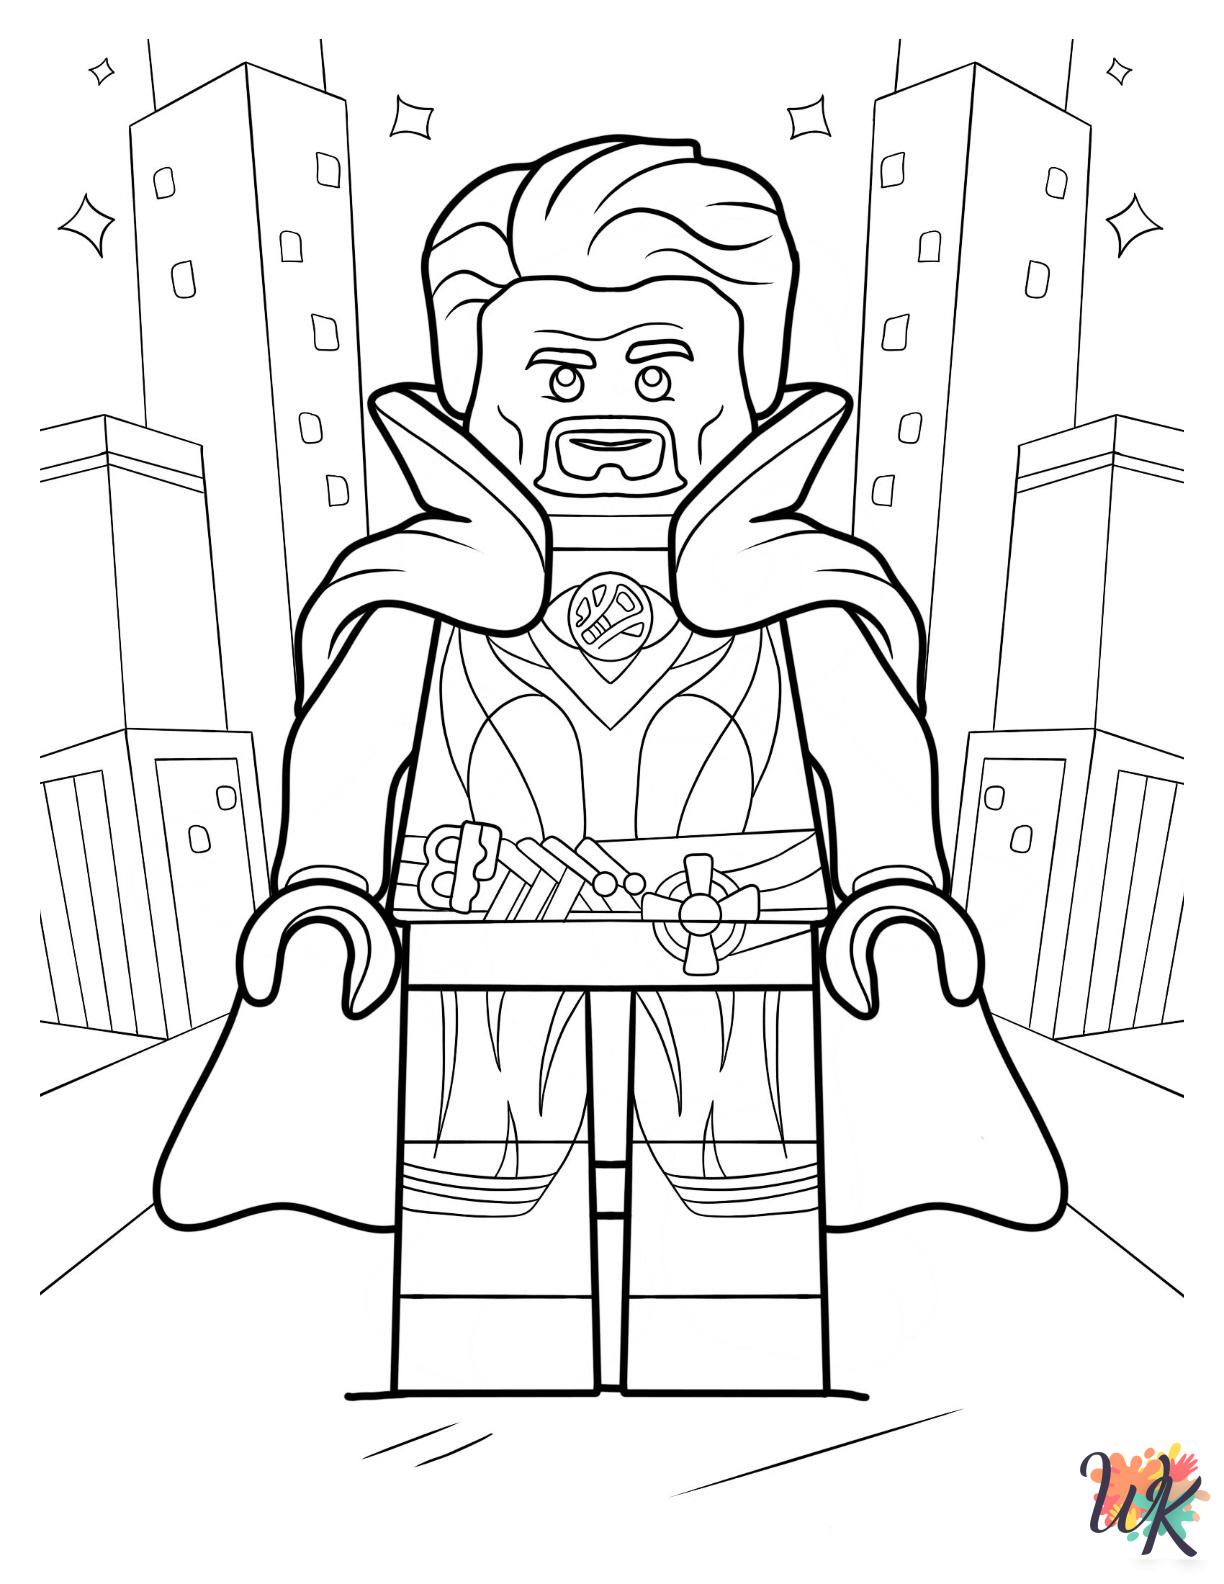 Lego Avengers coloring pages for kids